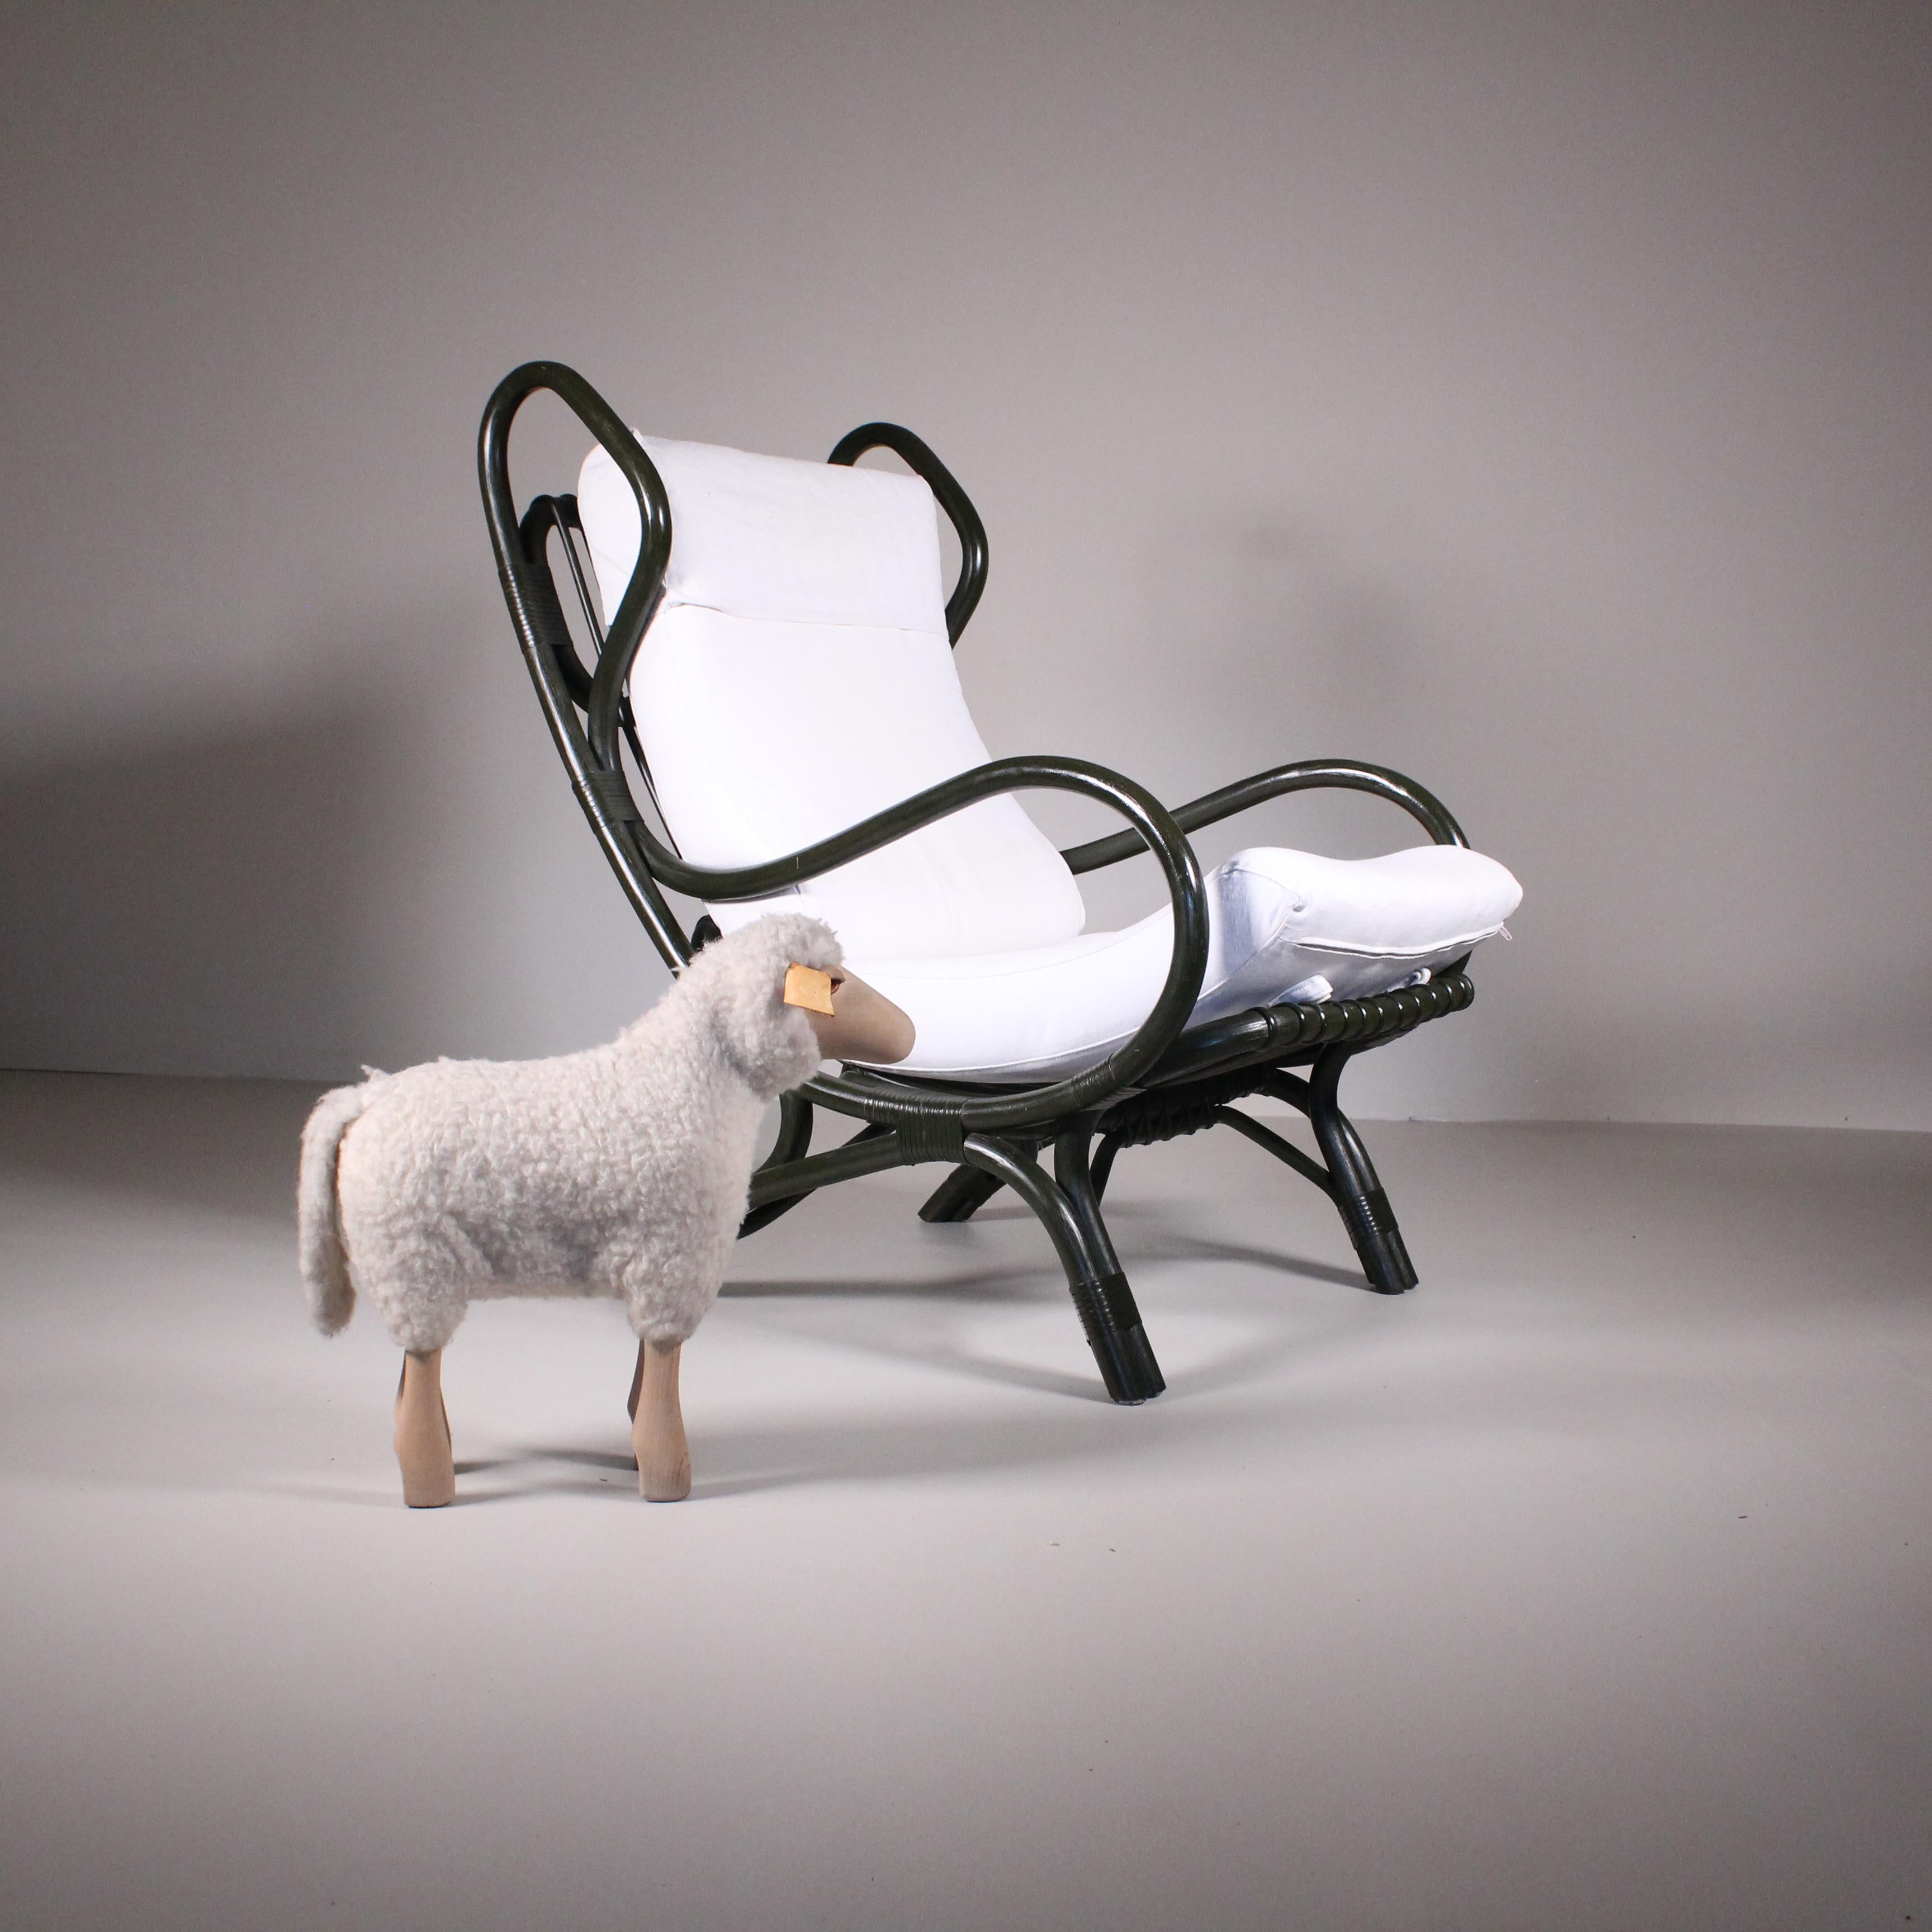 The Continuum armchair by Bonacina 1889 bears a signature of great prestige, that of the great 